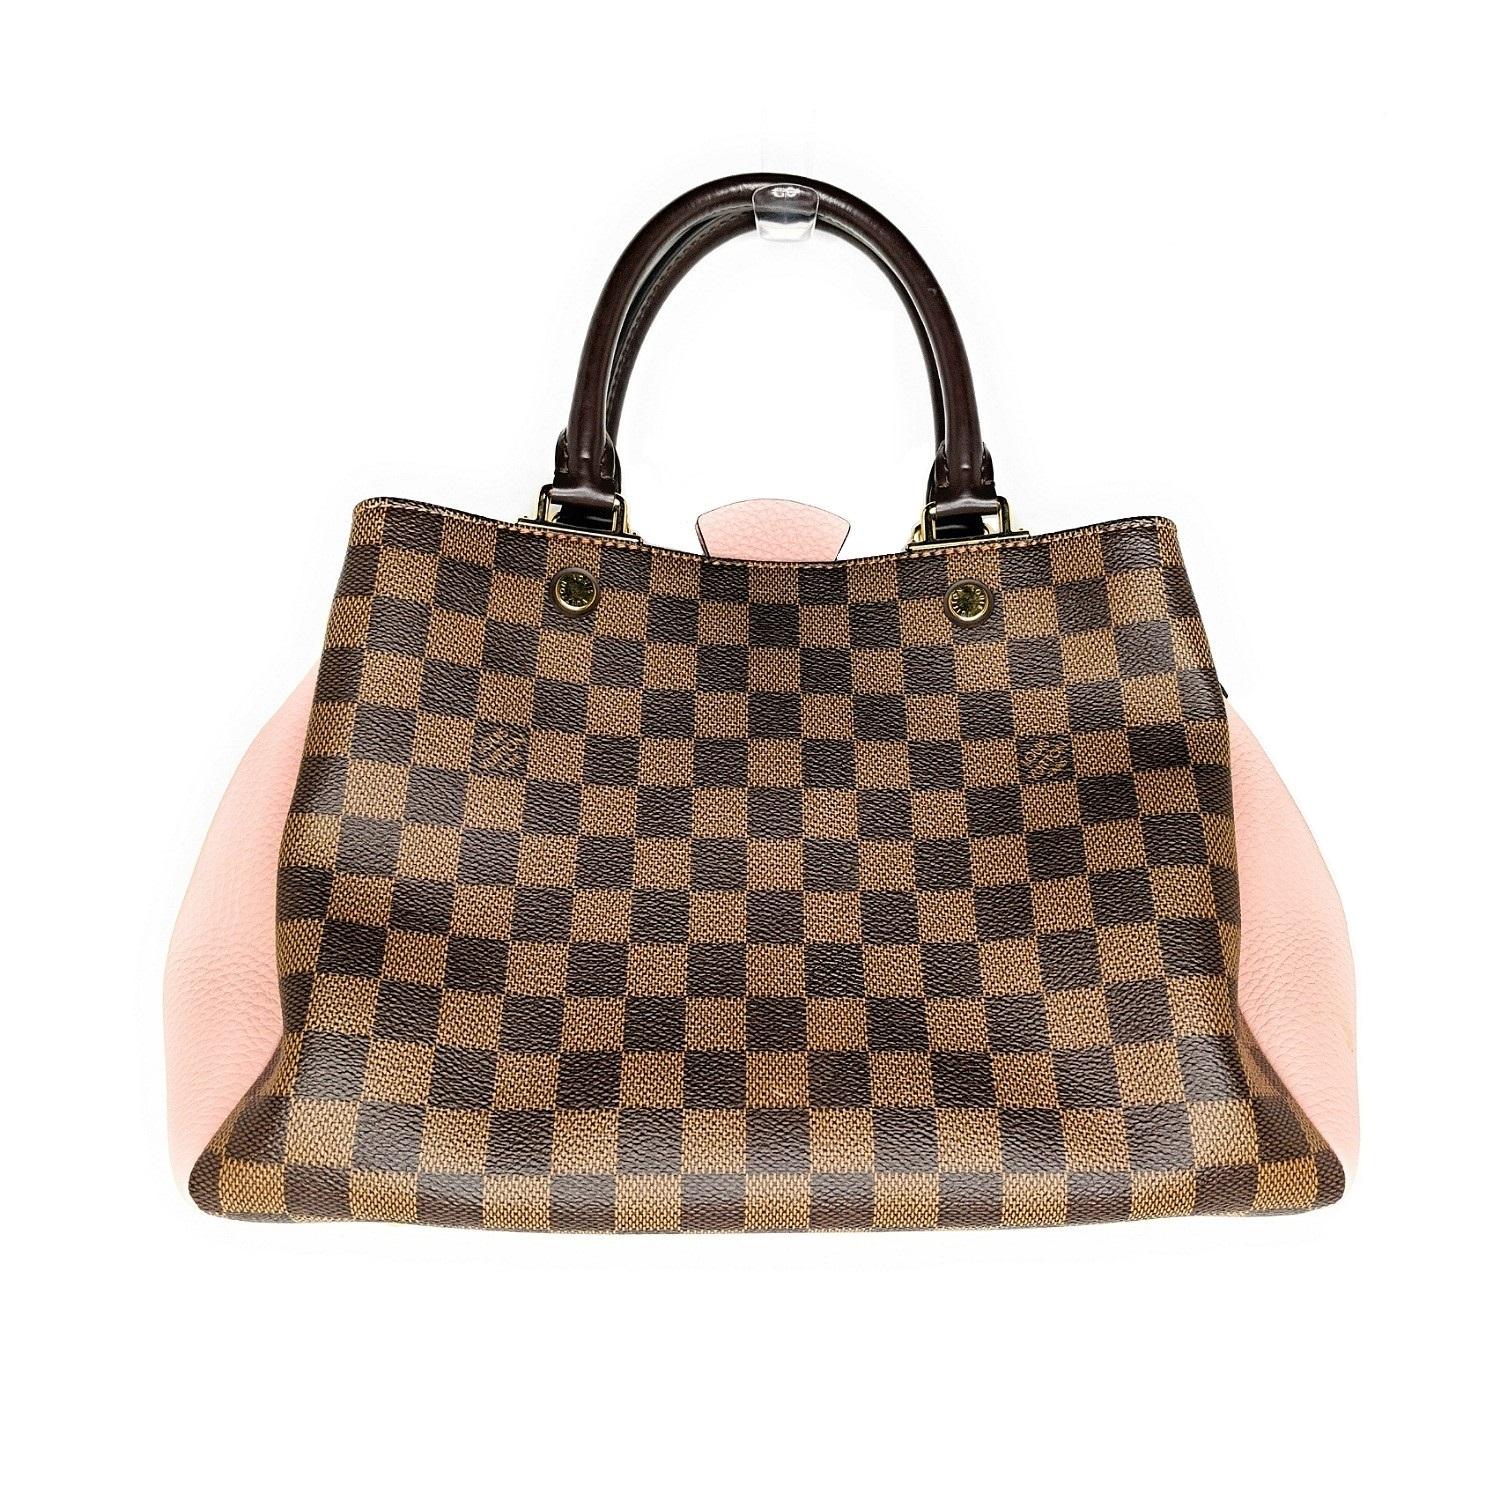 Brown and tan Damier Ebene coated canvas Louis Vuitton Brittany handle bag with brass hardware, dual rolled top handles, single detachable flat shoulder strap, pink leather trim, protective feet at base, pink Alcantara lining, three interior